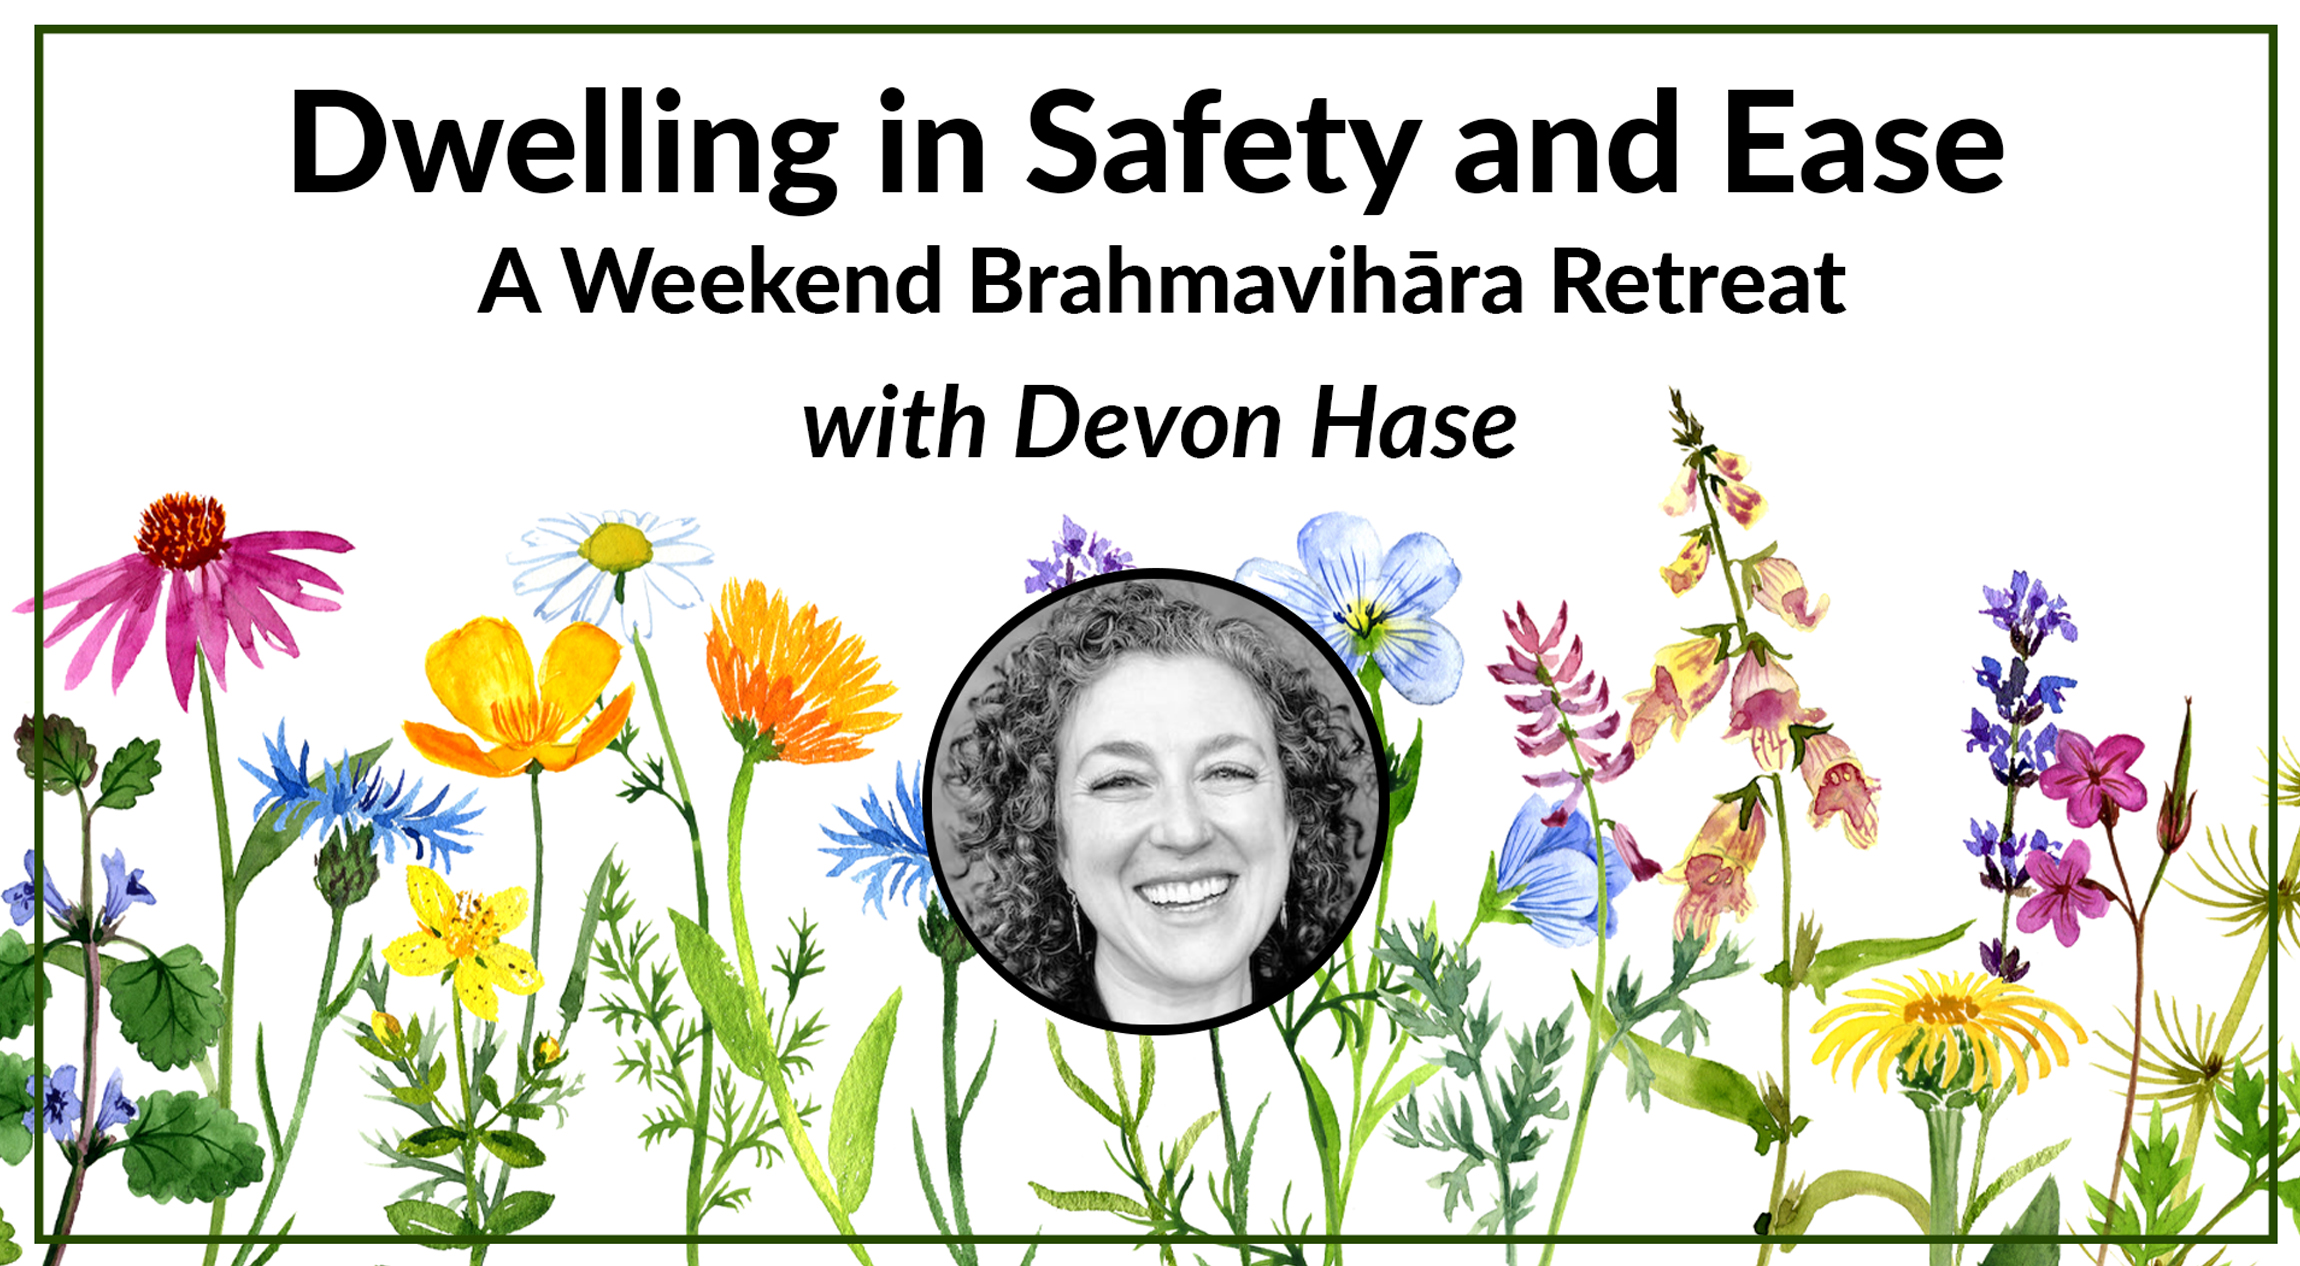 Dwelling in Safety and Ease with Devon Hase